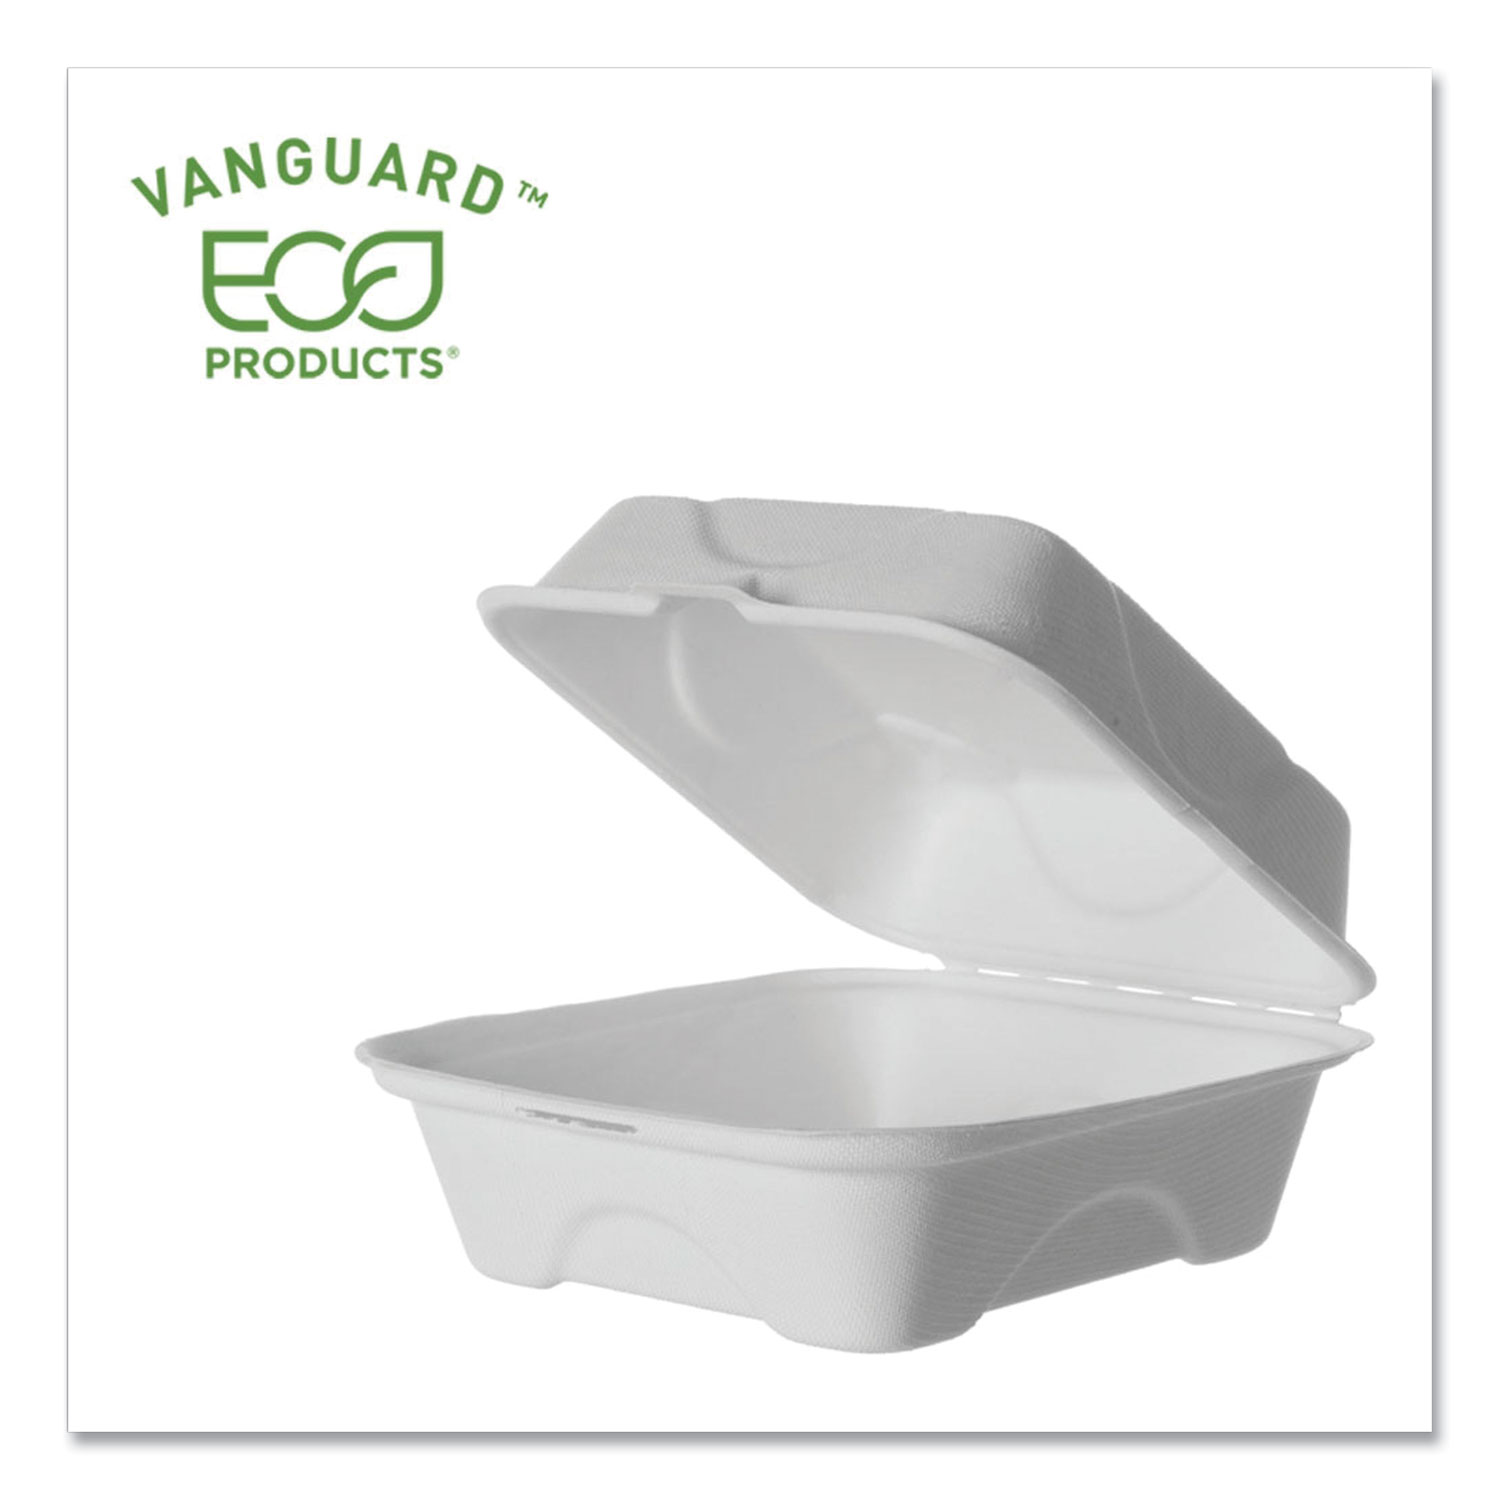 Eco-Products® Vanguard Renewable and Compostable Sugarcane Clamshells, 1-Compartment, 6 x 6 x 3, White, 500/Carton